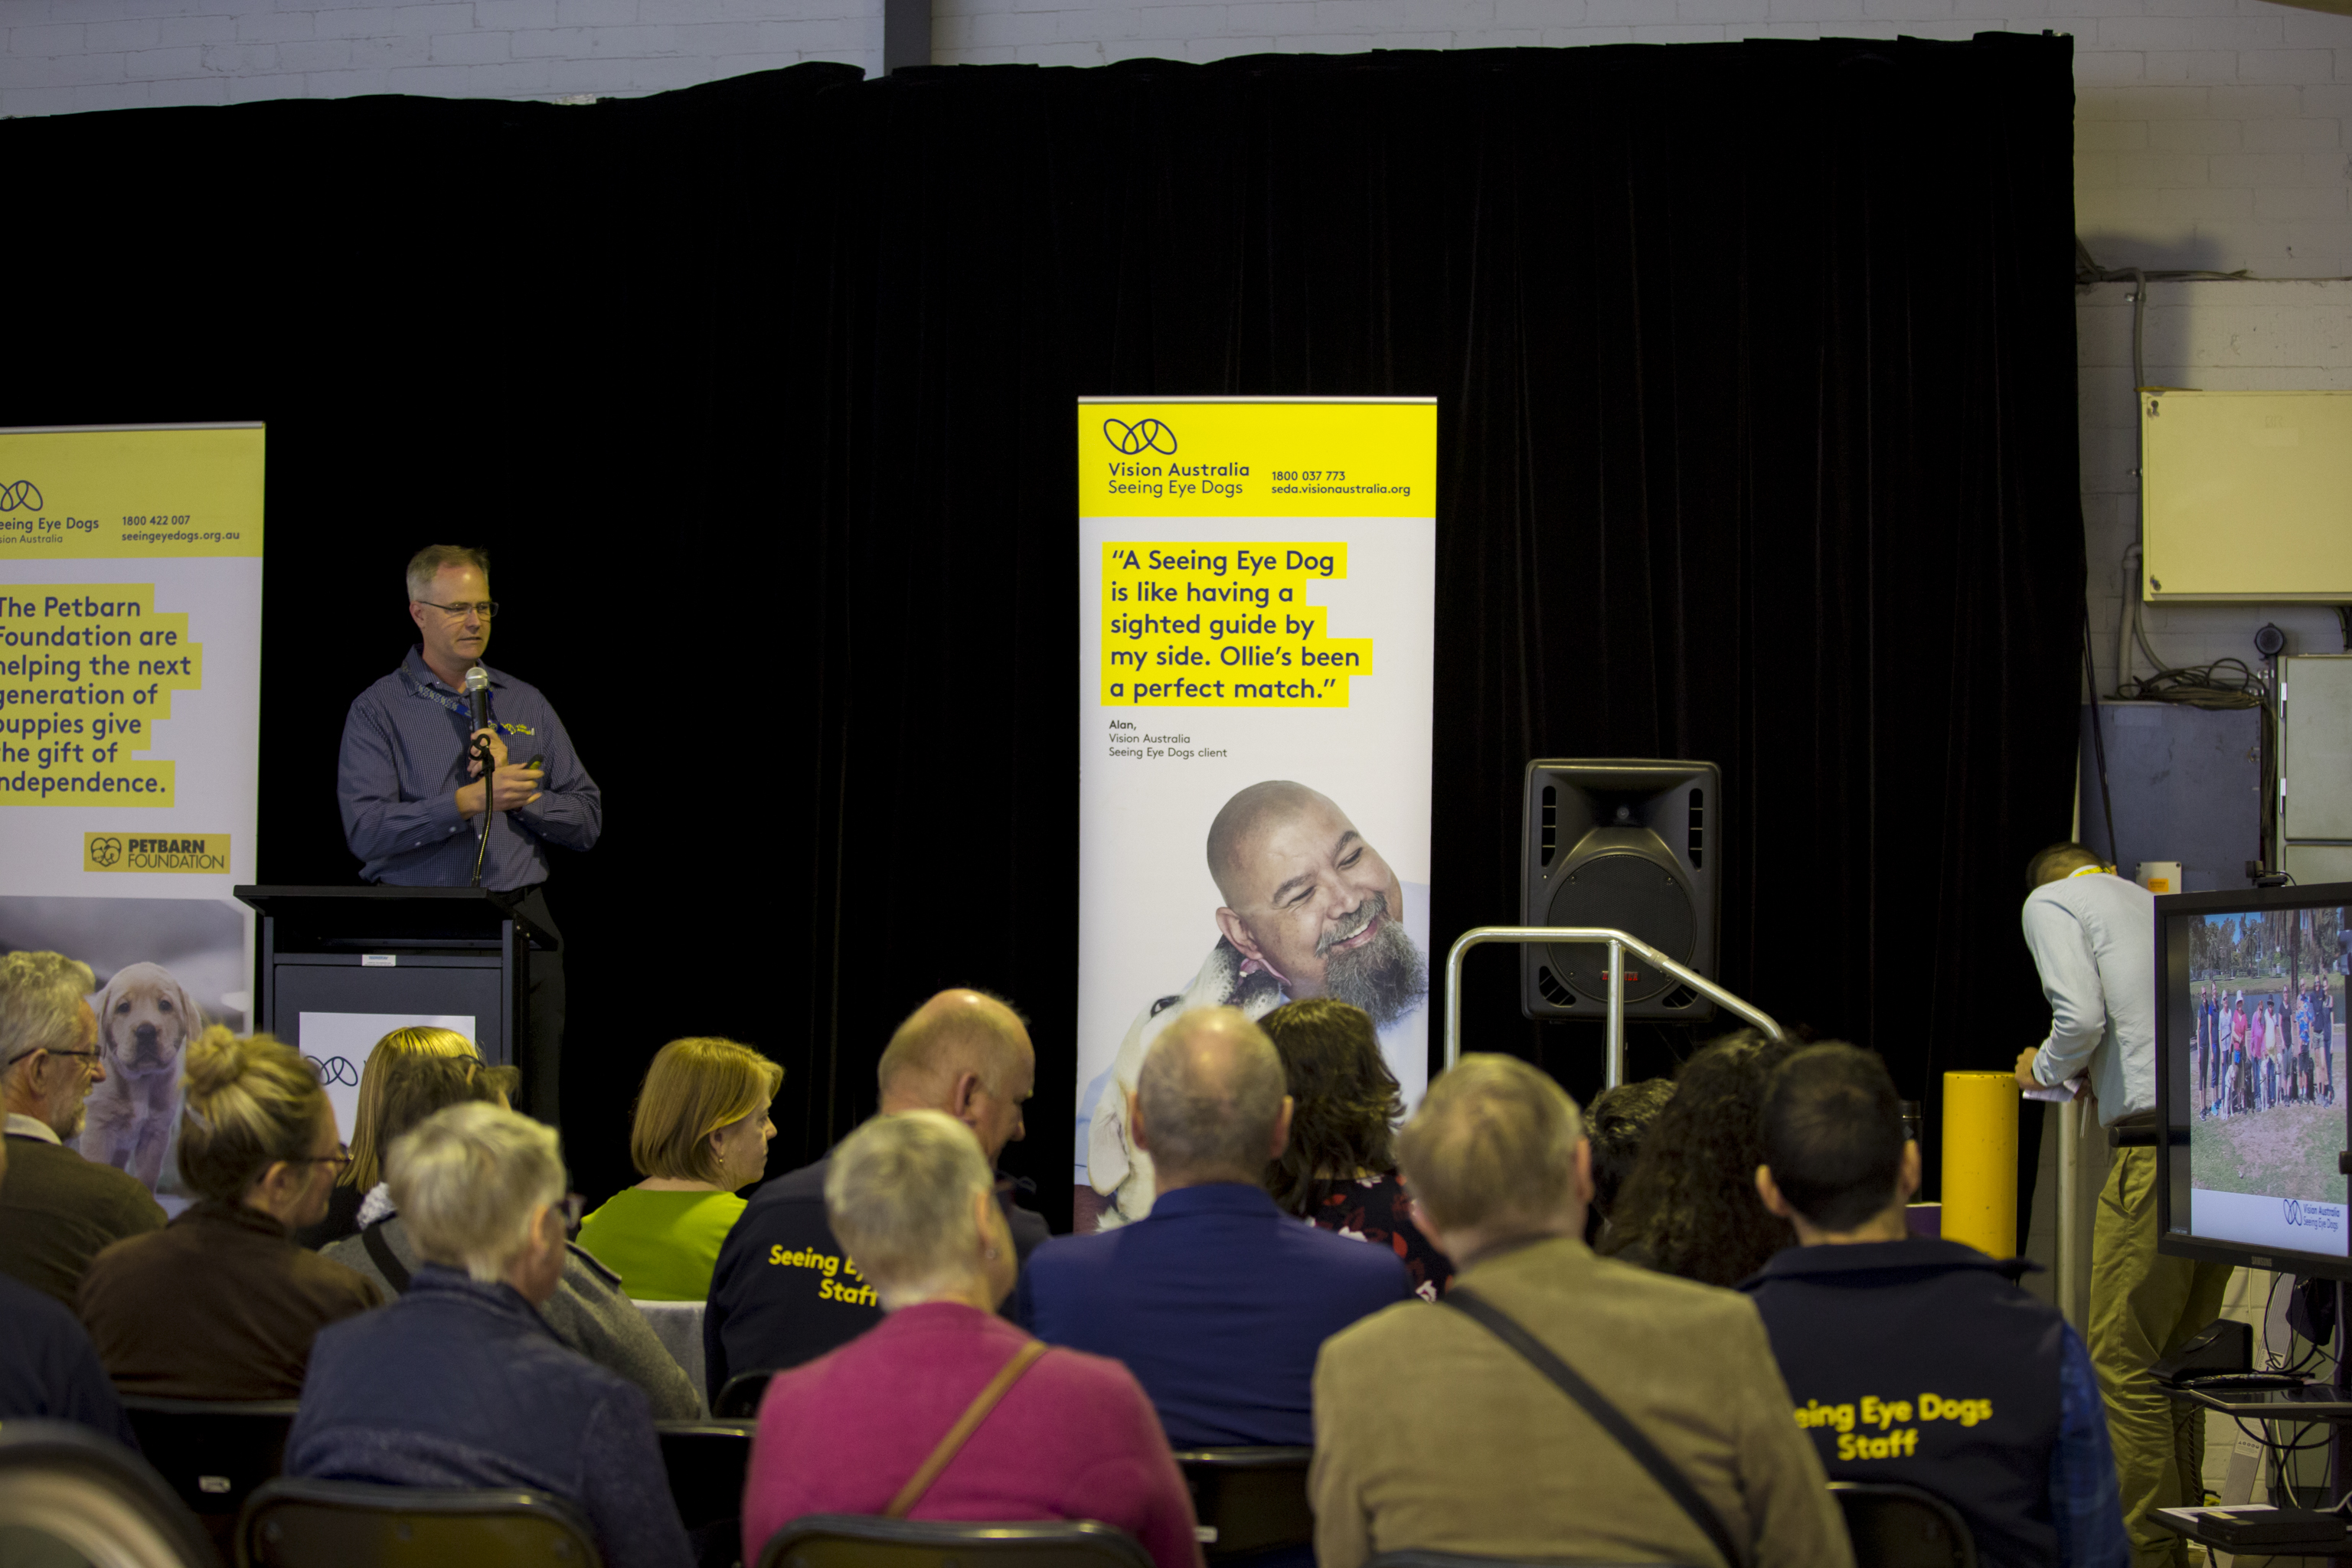 "Chief Instructor & Puppy Development Manager Patrick Glines kicks off proceedings by welcoming everyone to the event."